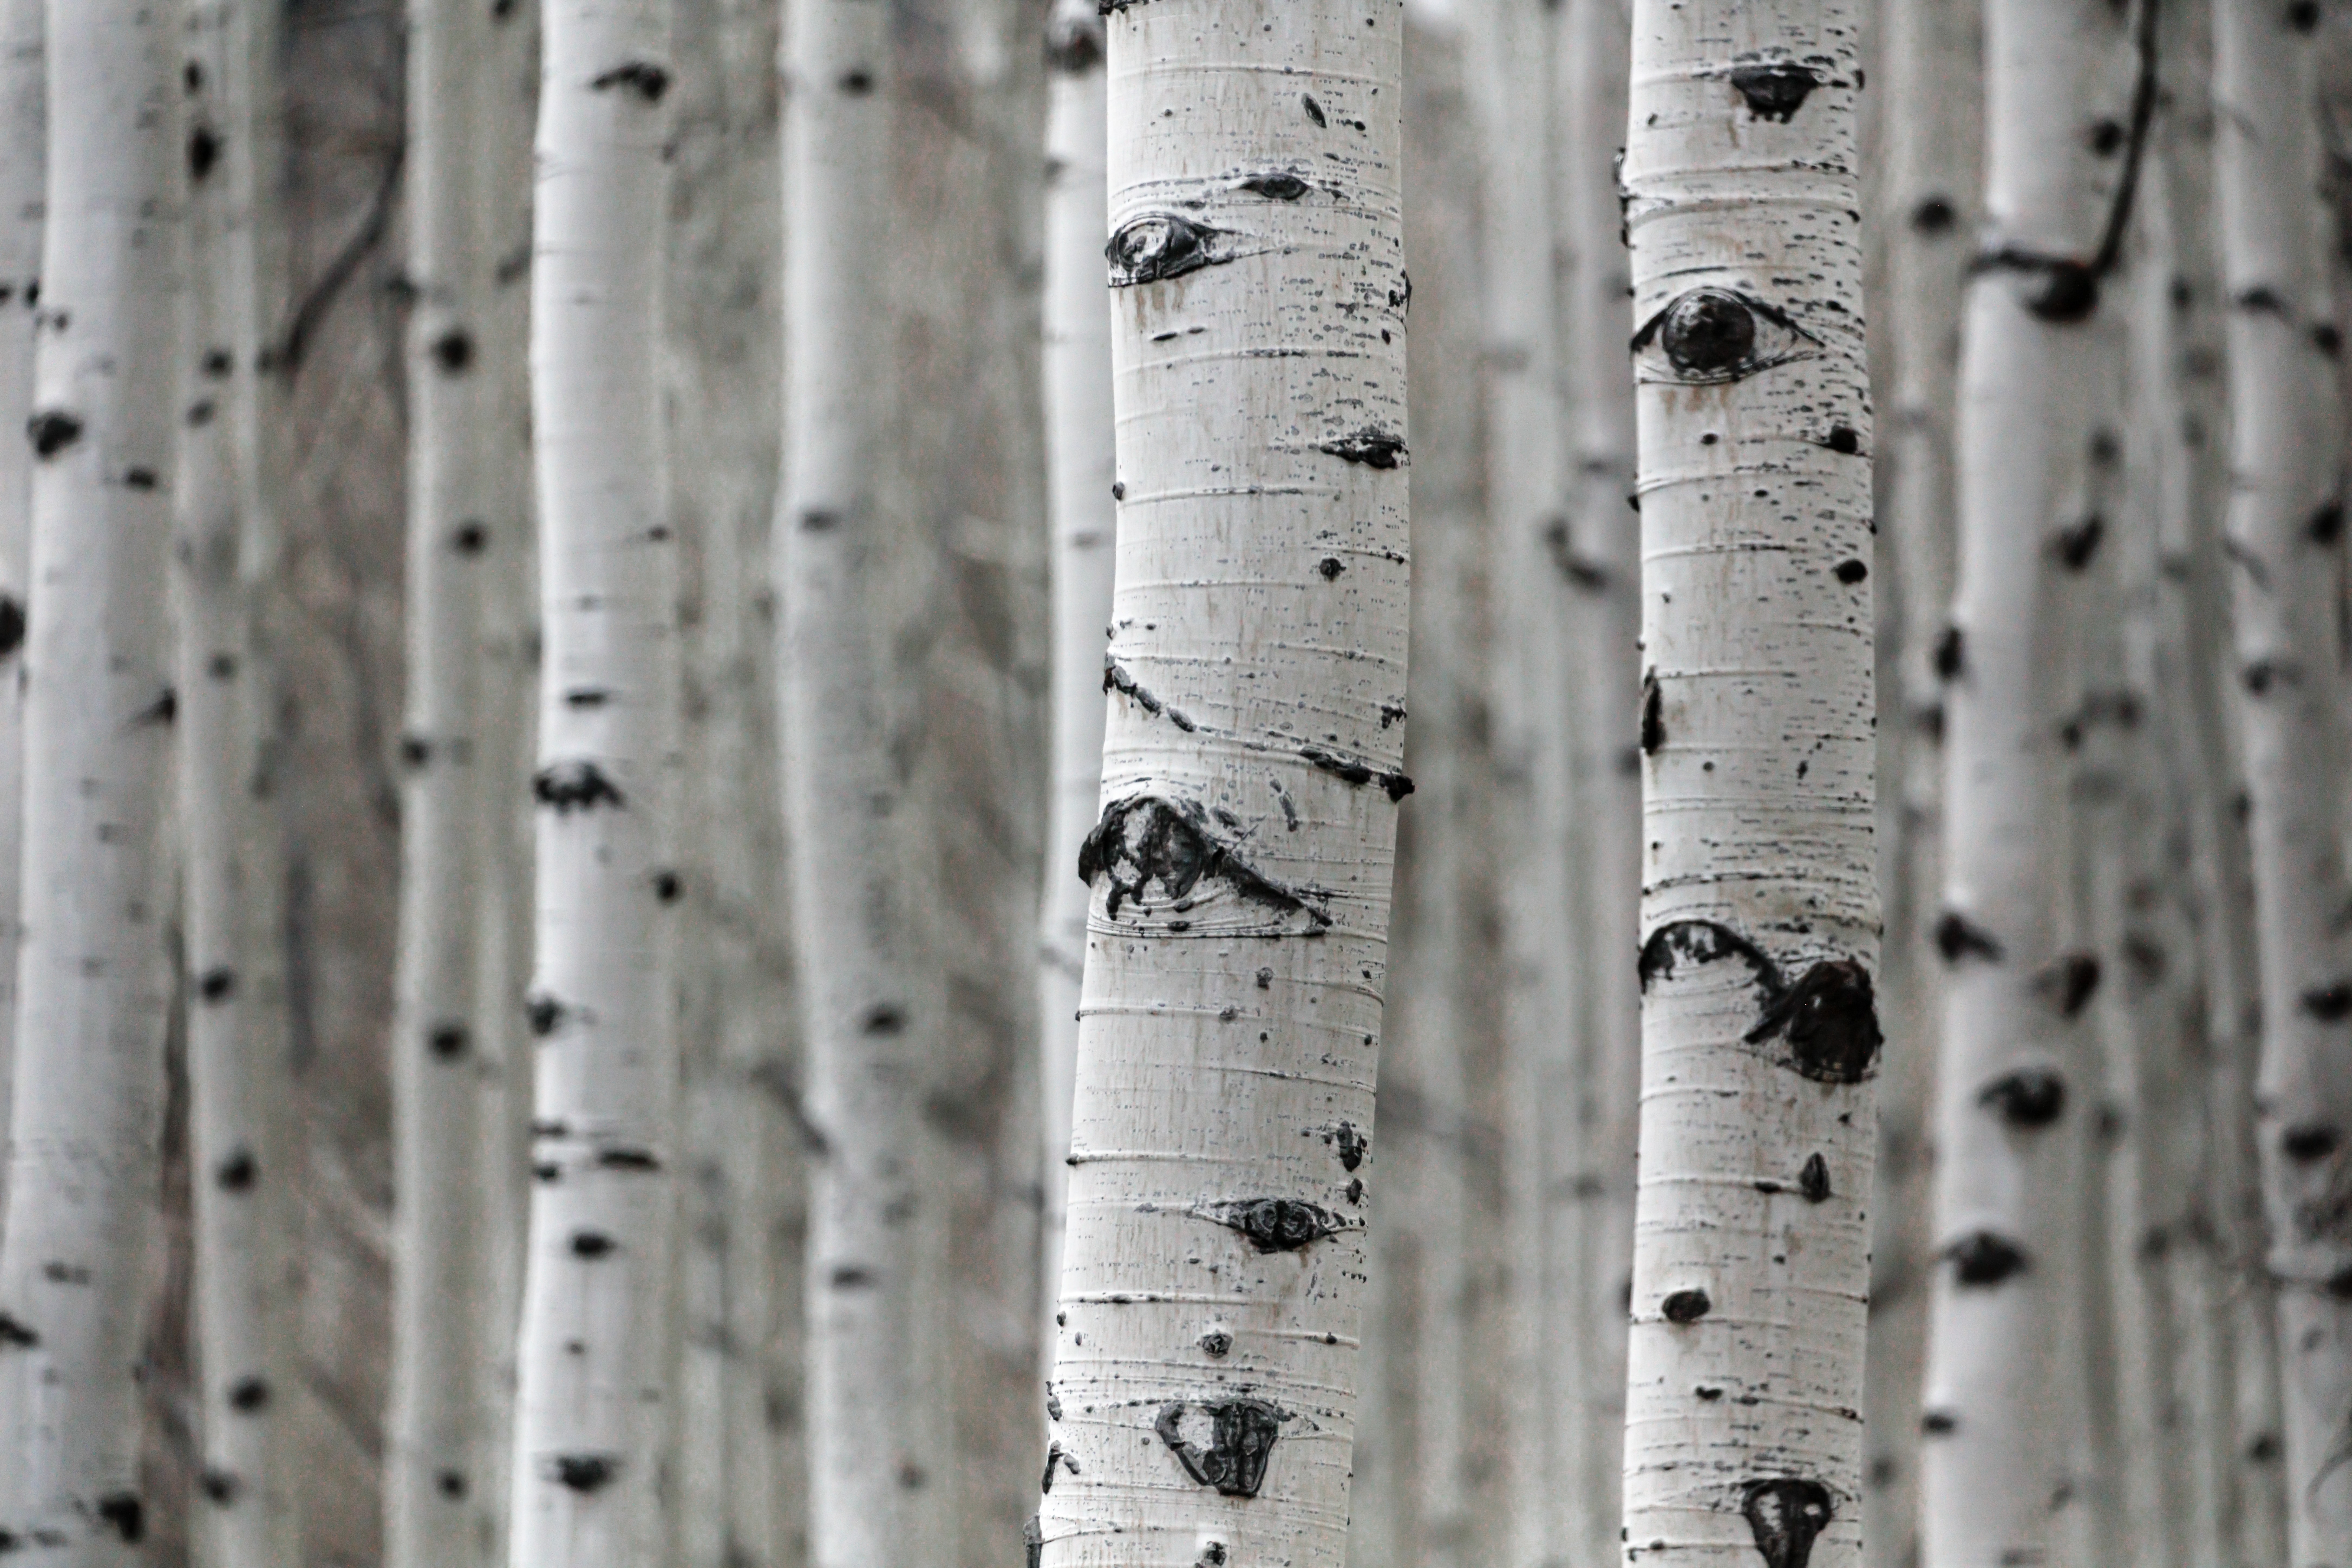 How to Save a Dying Birch Tree: Treatment & Prevention